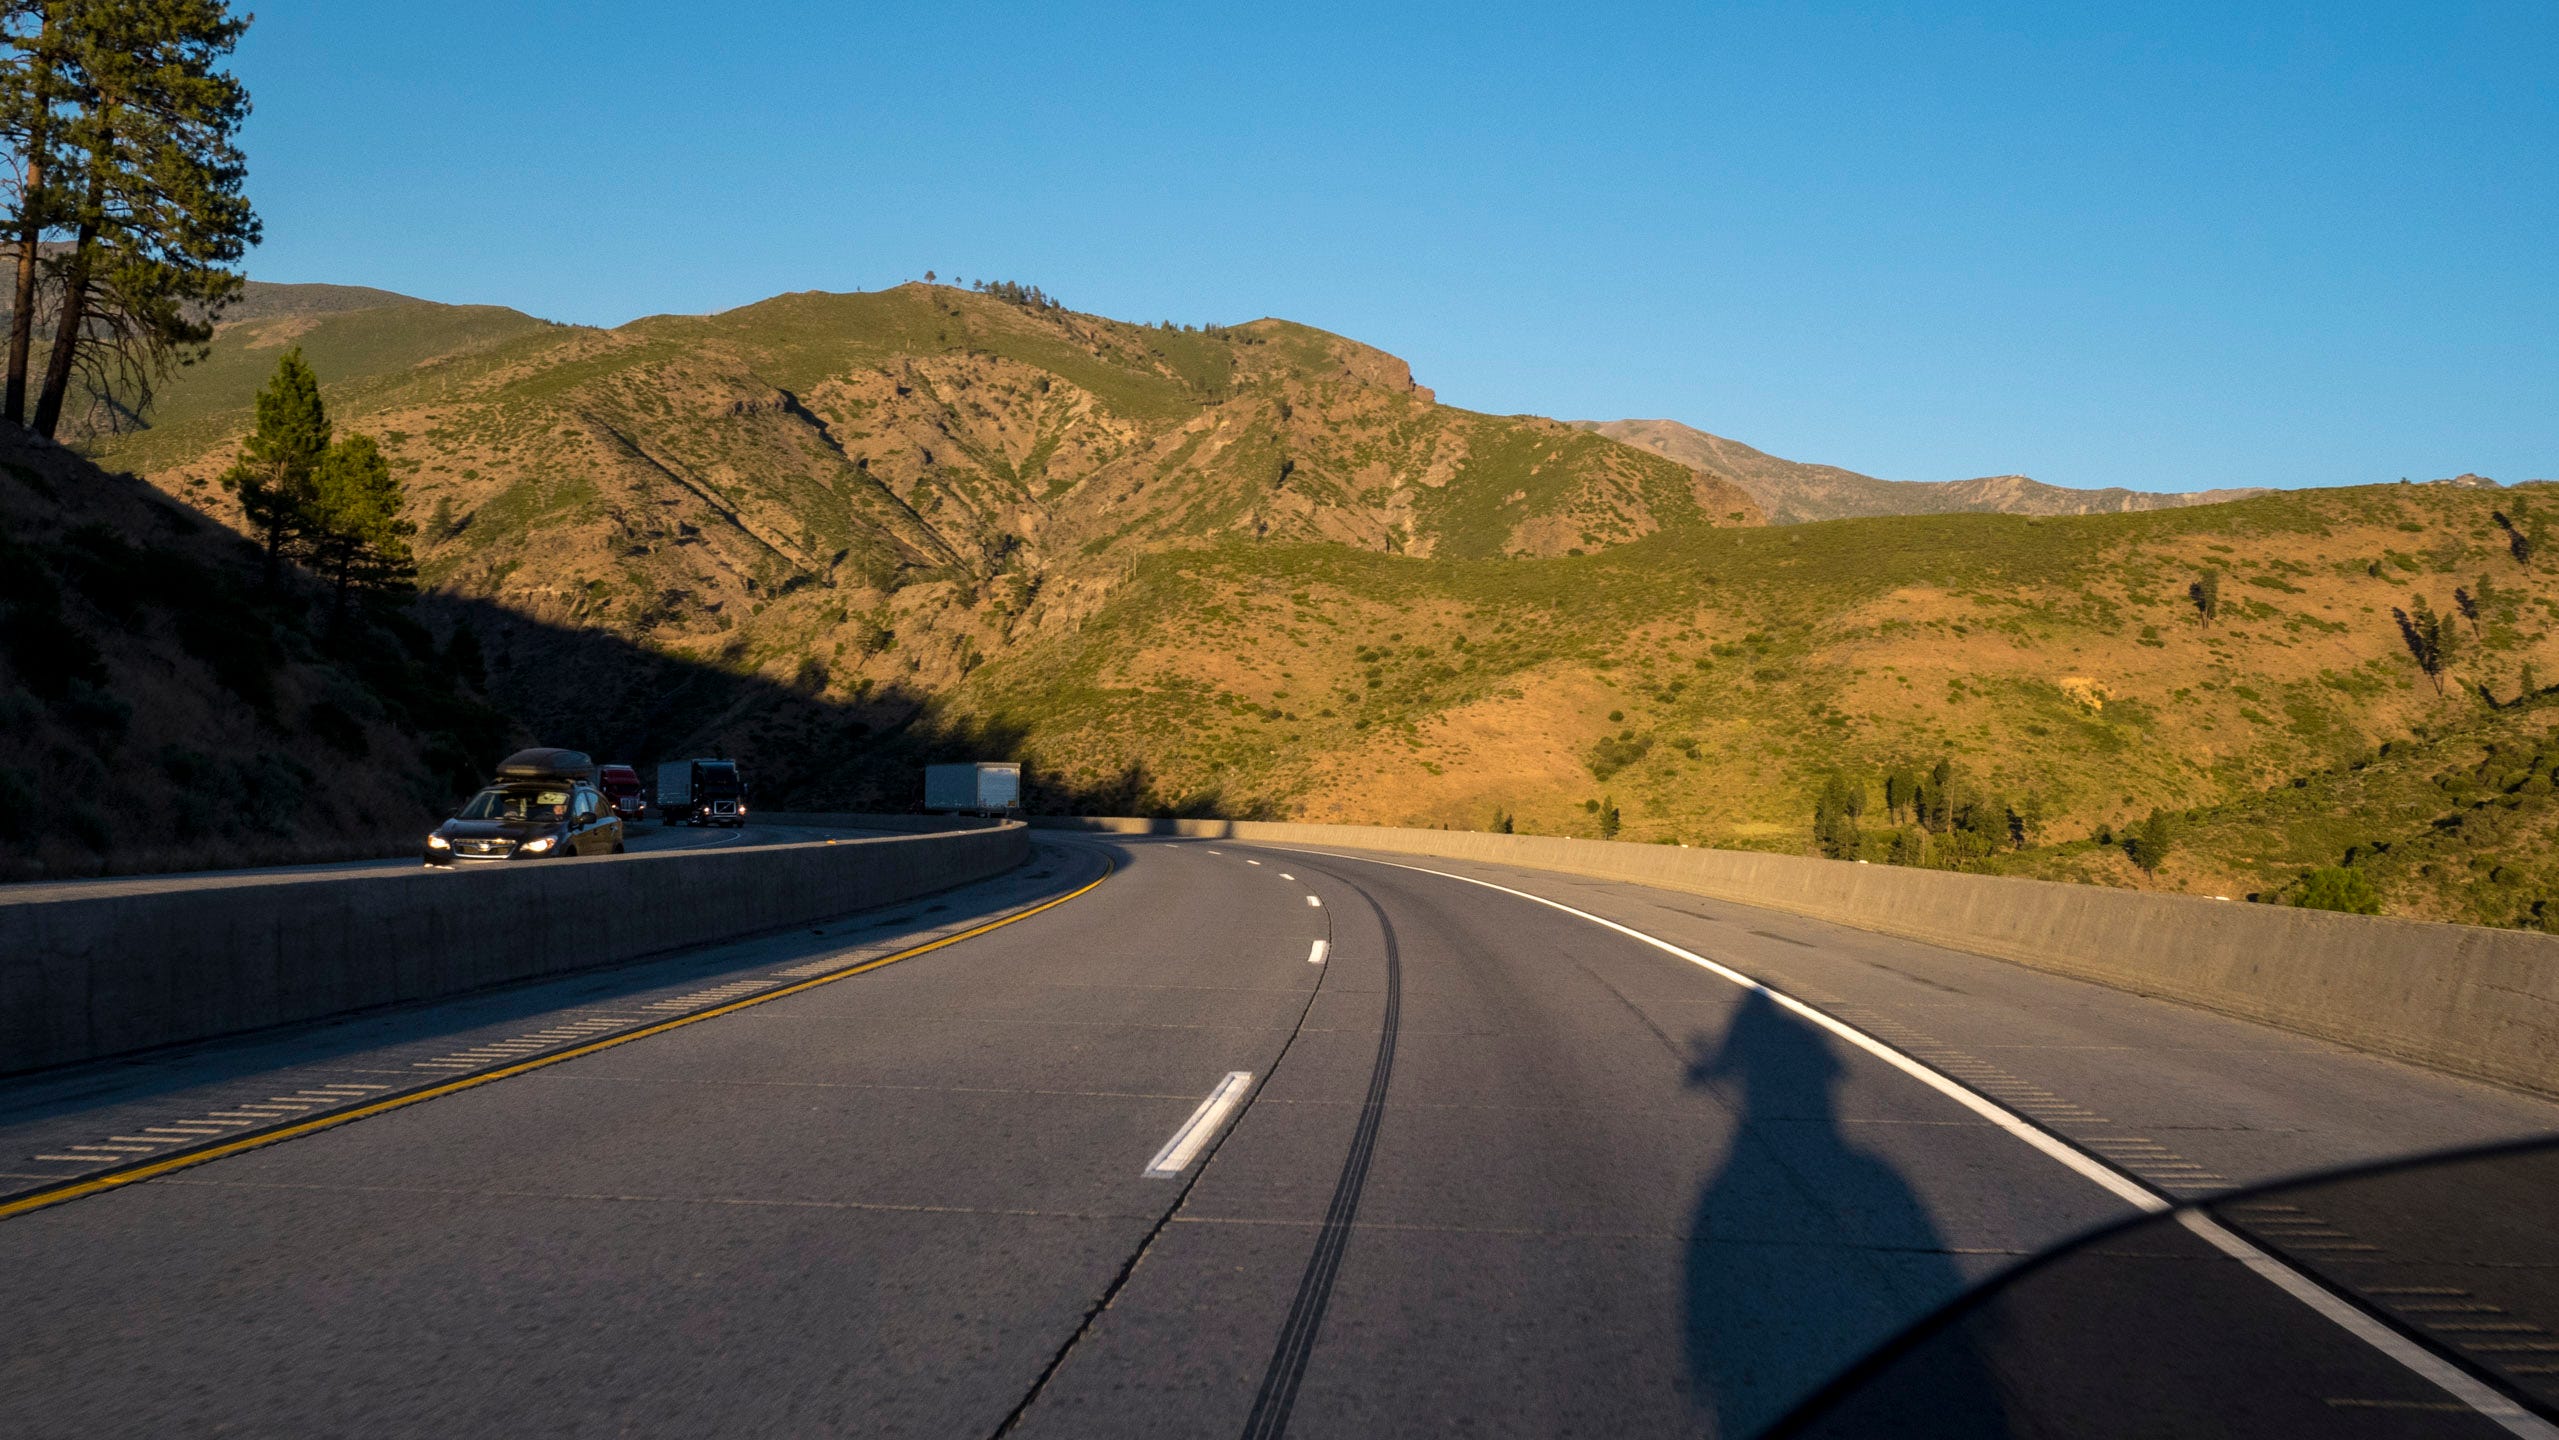 A photo in the late afternoon of a motoryclist riding down a mountain highway. The photo is taken from the motorcyclist's point of view; you can see the motorcycle's windshield in the lower right corner of the photo, the sun is behind him and you can see the shadow of him and the motorcycle on the road. The highway is descending through rugged, mountains, nearly bare but for some short scrub and grasses growing in patches and a small stand of trees at the rounded peek of the mountain directly ahead. The sun is low and casting a warm light upon the scene. There is a white 18-wheeler also descending in the distance, and a handful of vehicles climbing up the hill towards the rider and into the sun.